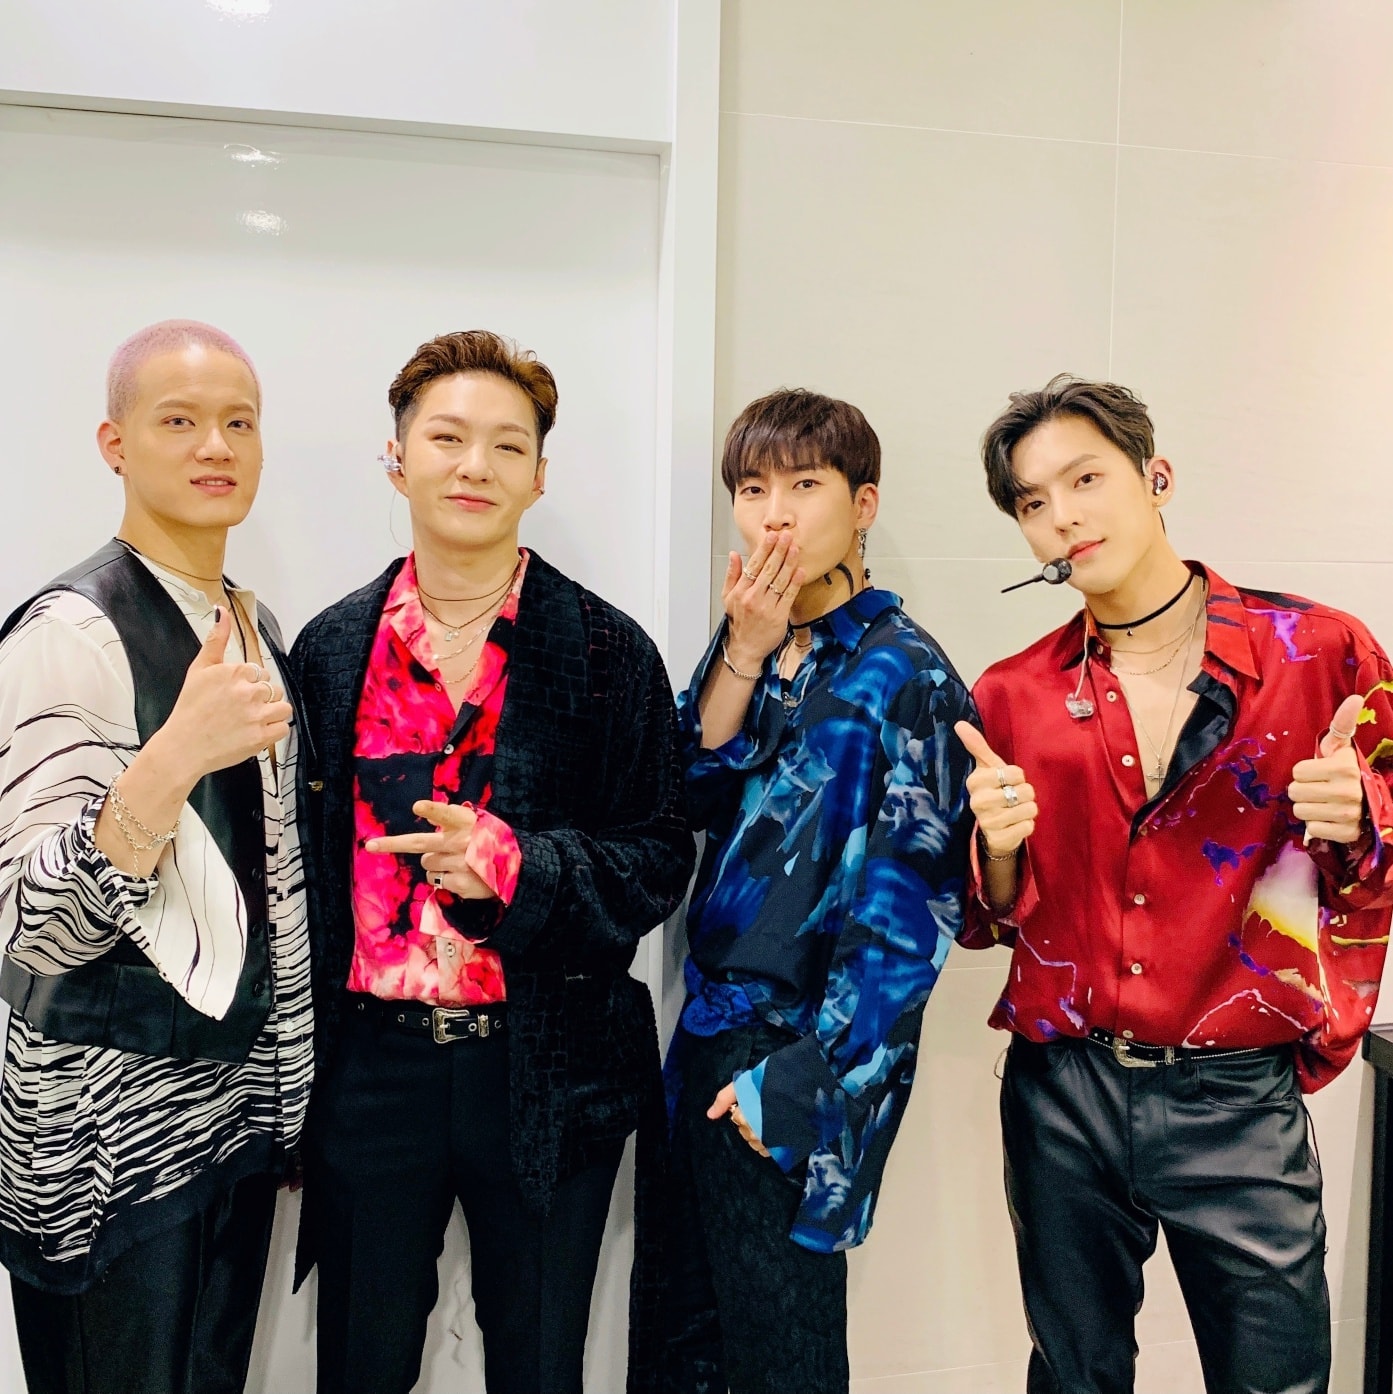 First place BTOB 4U “Thanks to the melody and members”